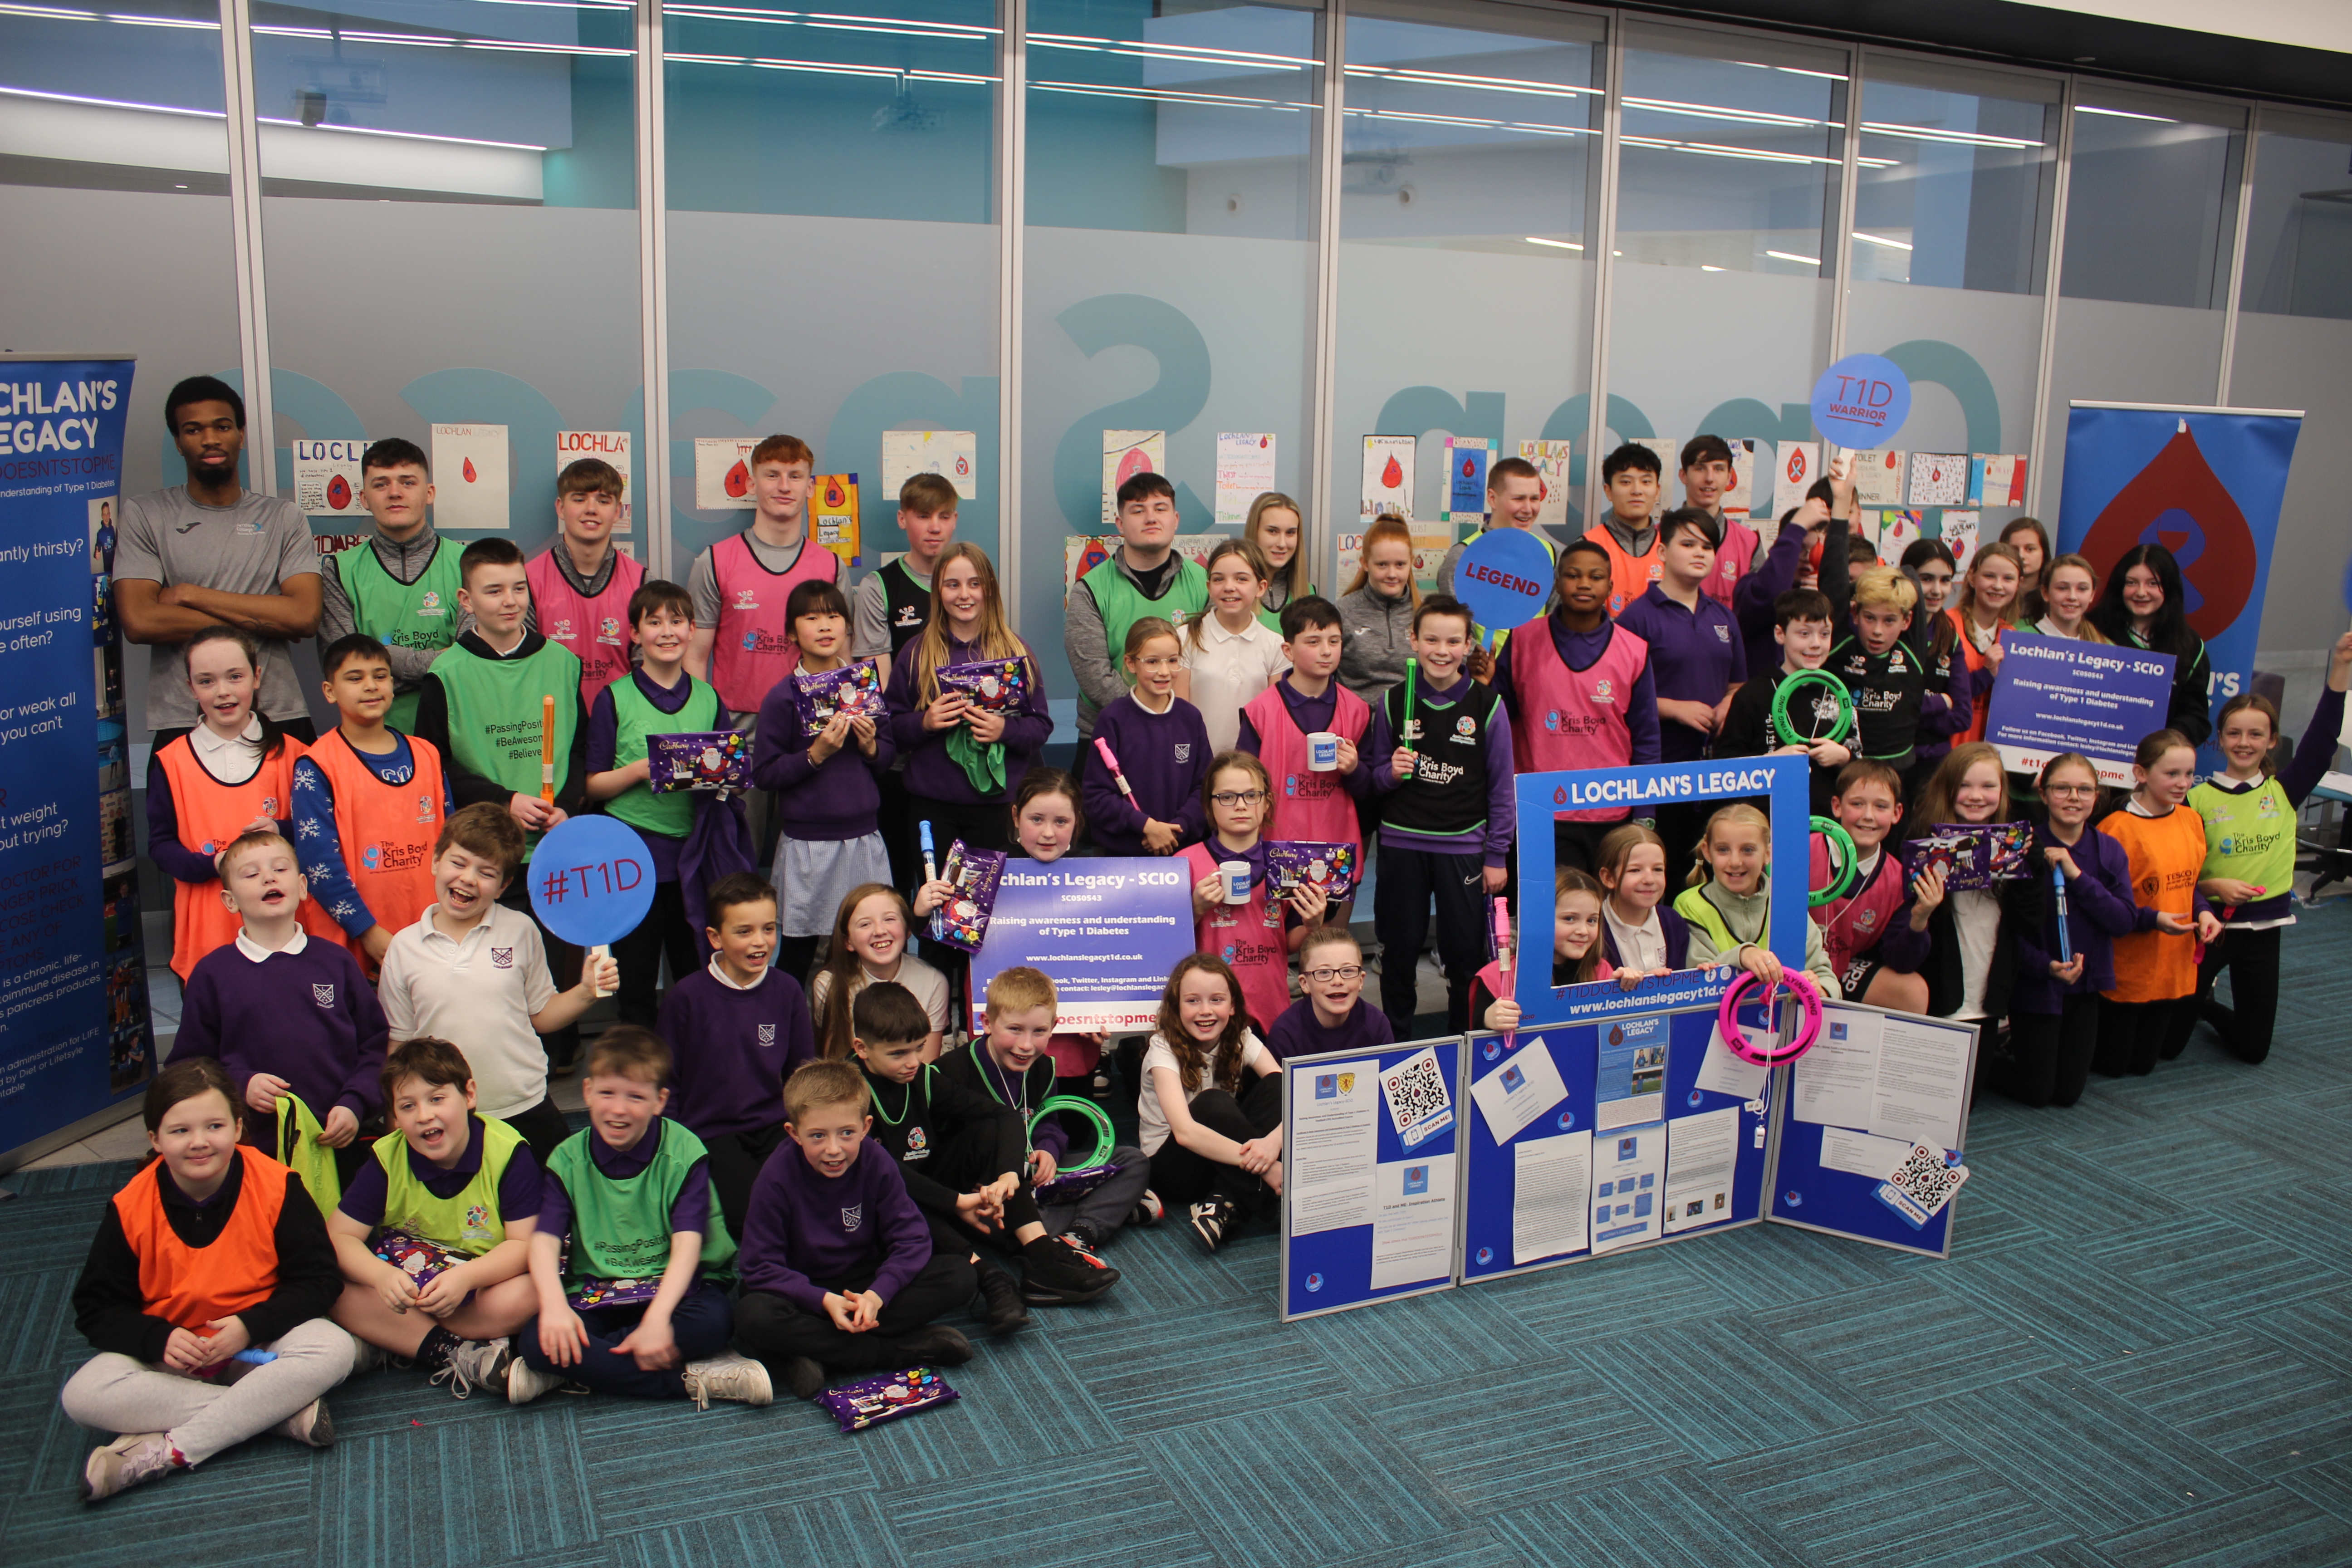   Sport students link up with charity on type 1 diabetes awareness